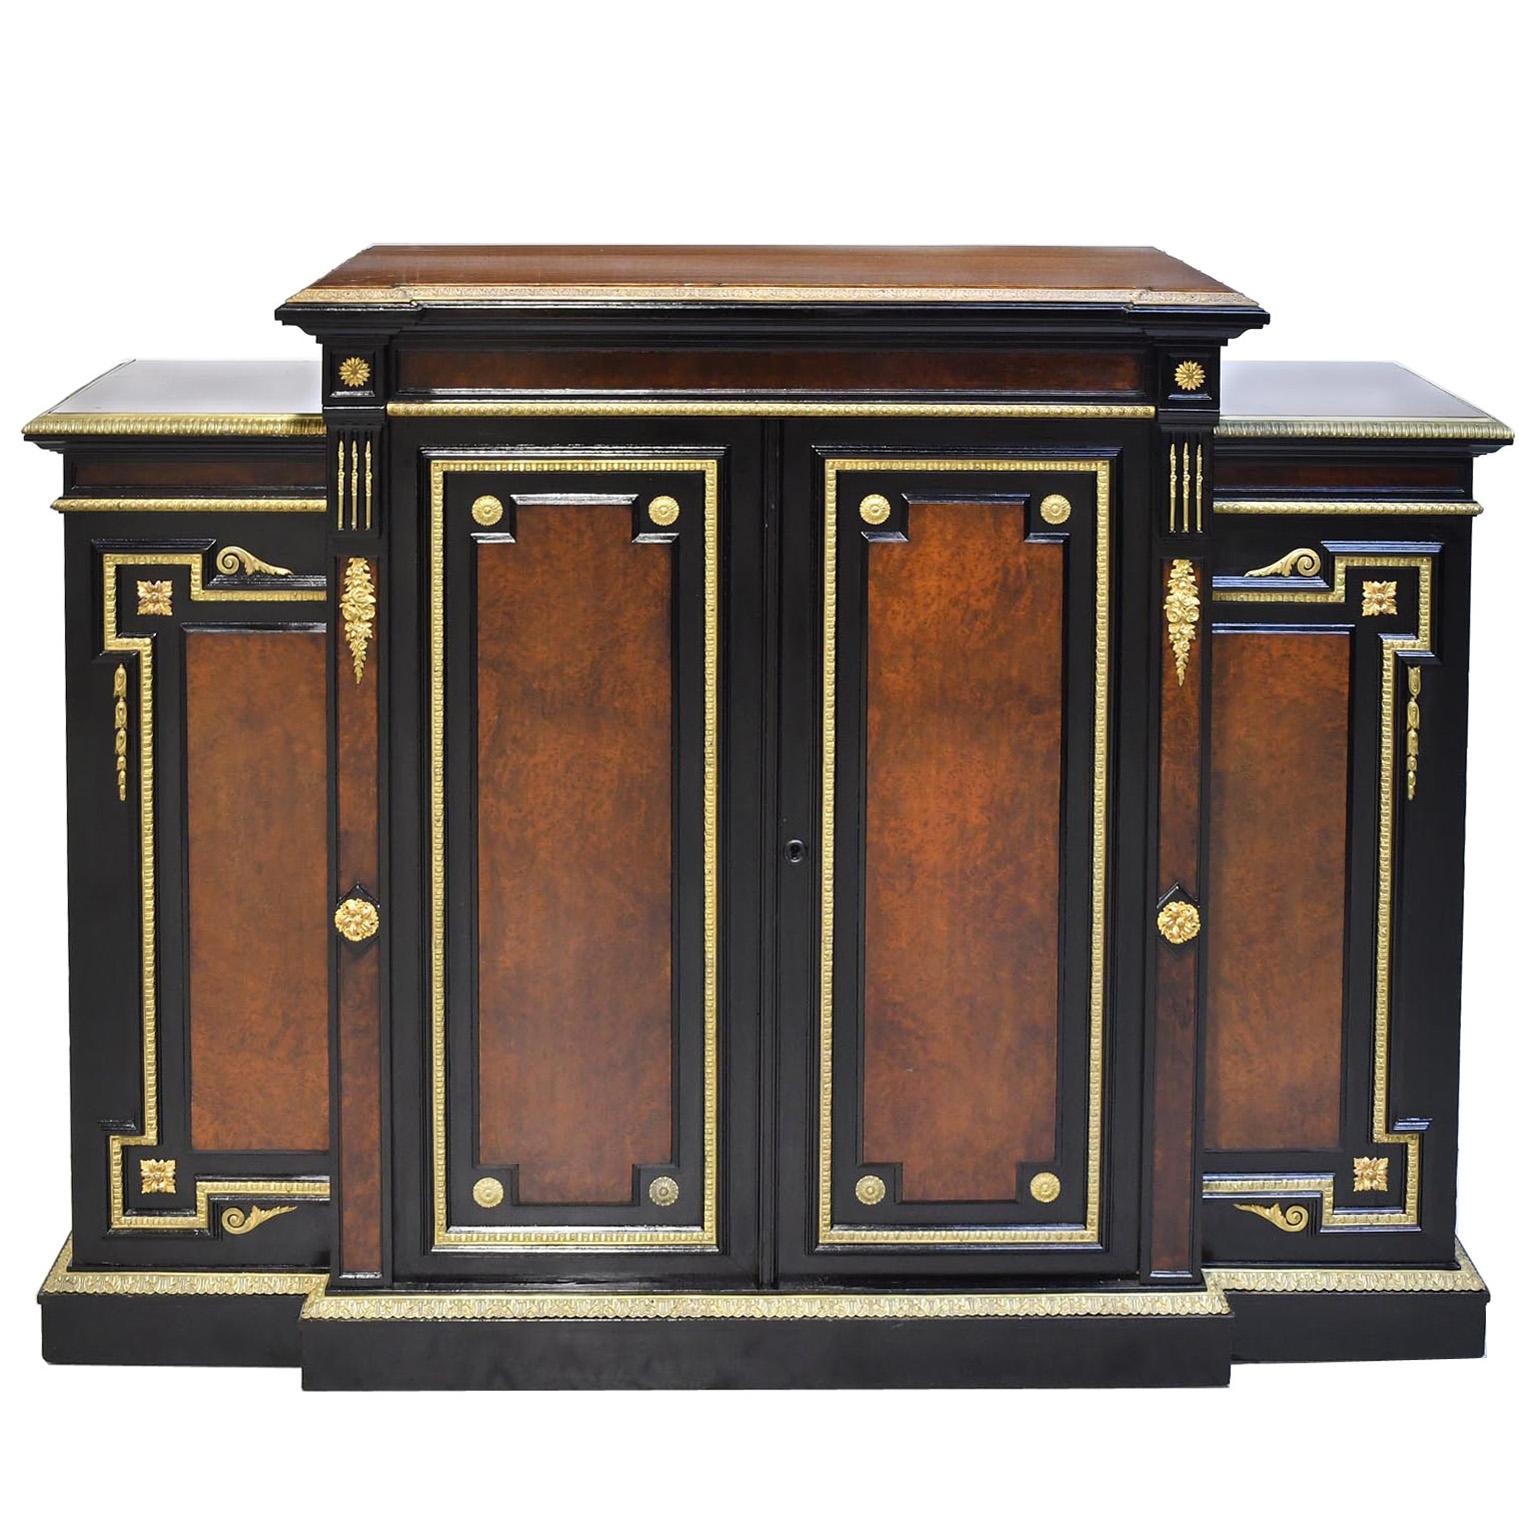 American gilded age ebonized step back credenza with burled amboyna panels and finely articulated ormolu bronze doré mounts in the manner of NY cabinet makers Ringuet-Leprince, Marcotte and Co. The exquisite doré mounts and the European half mortise